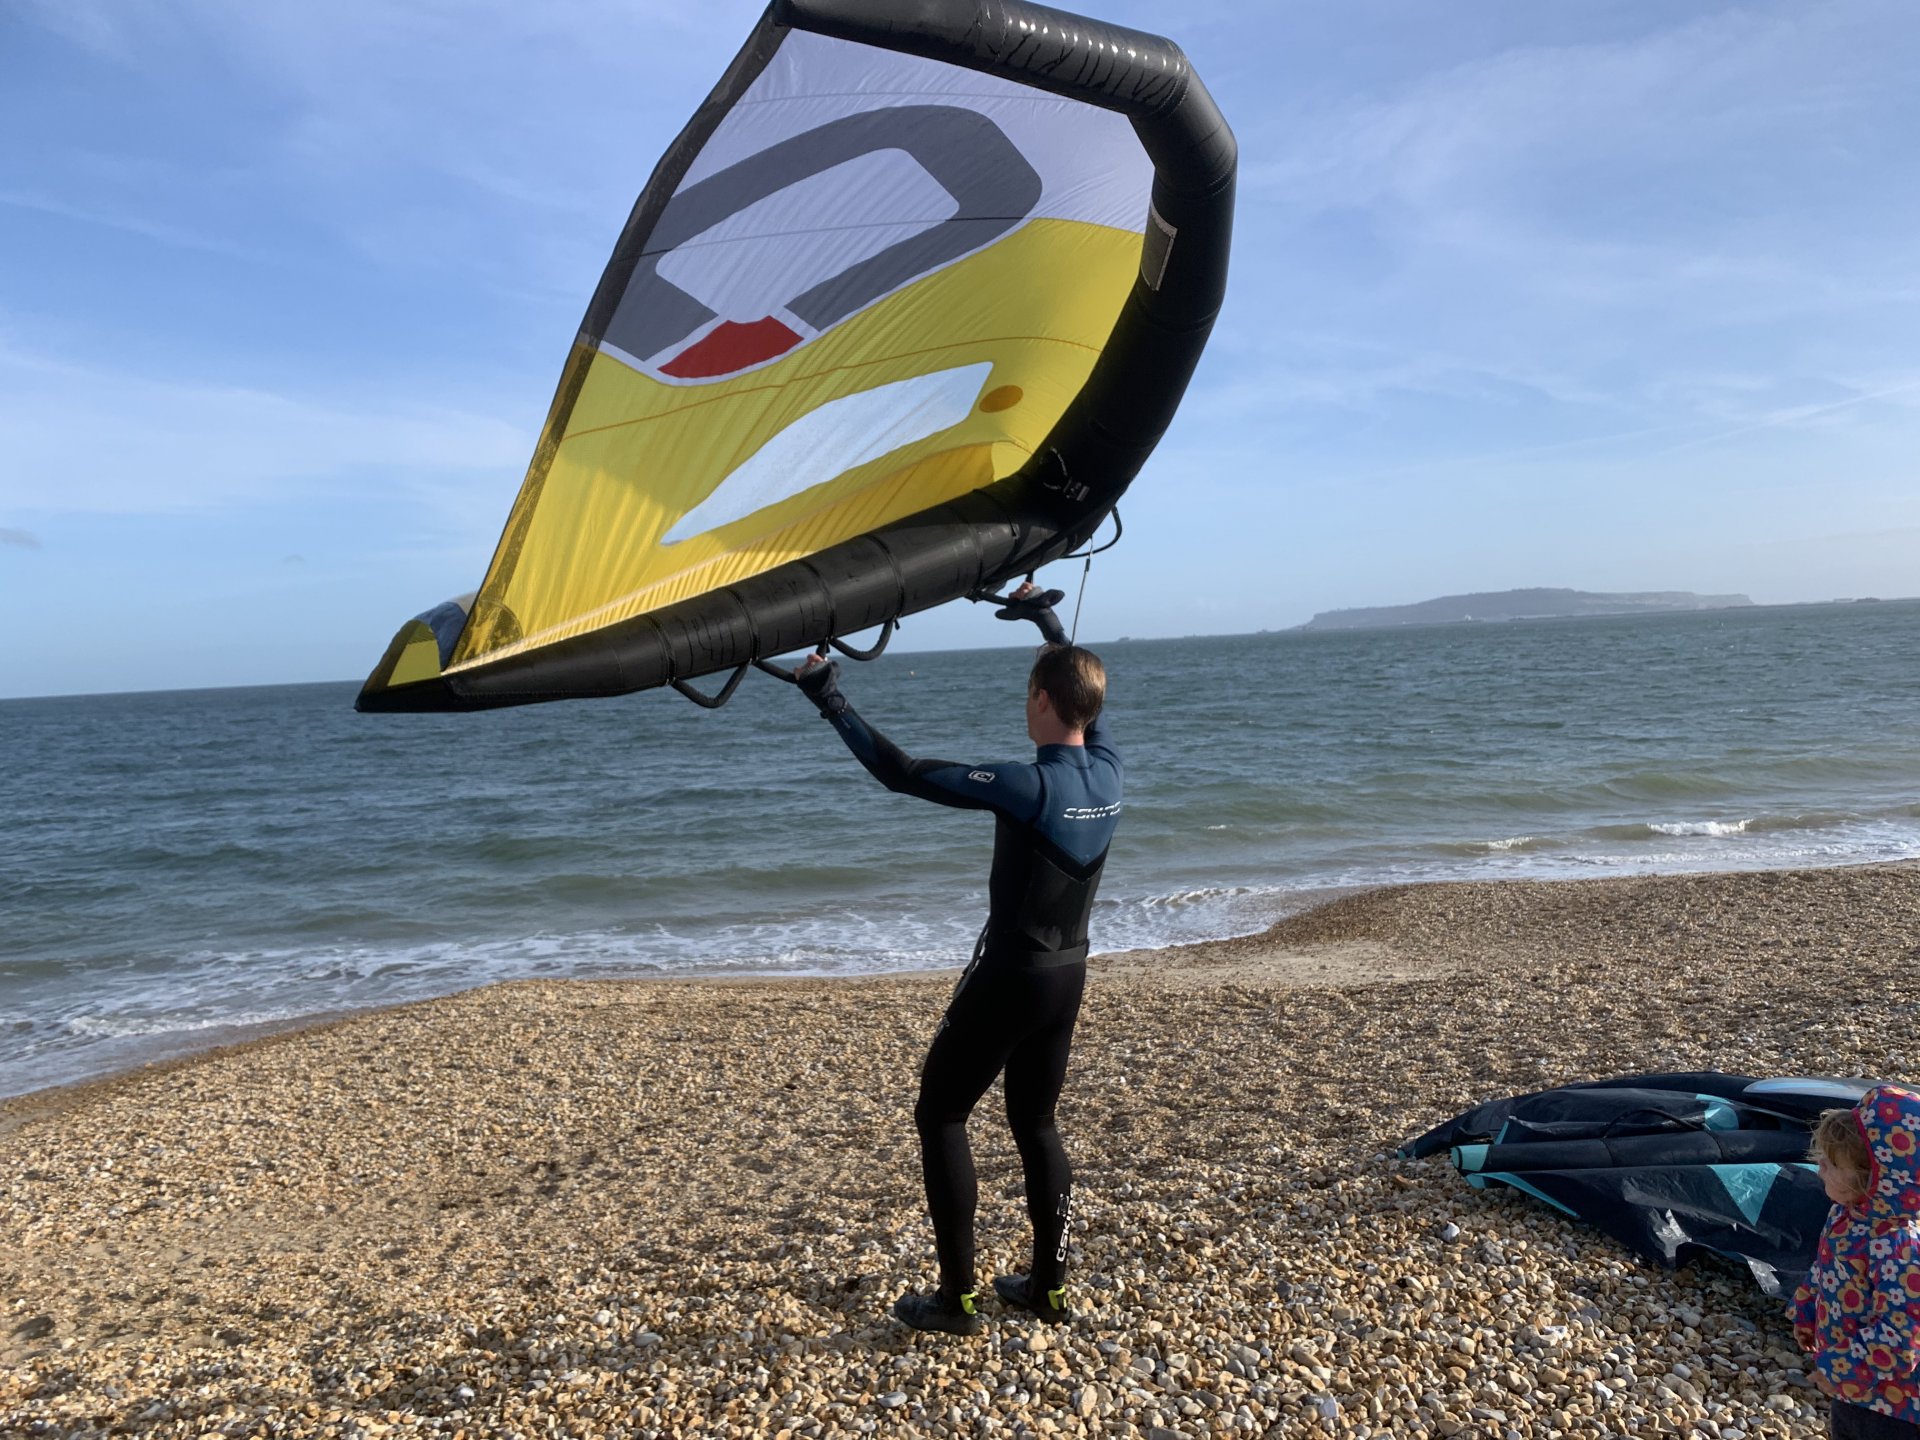 Ozone Wasp V2 5m 2021 | Wing Foiling, SUP And Surf Reviews » Wings